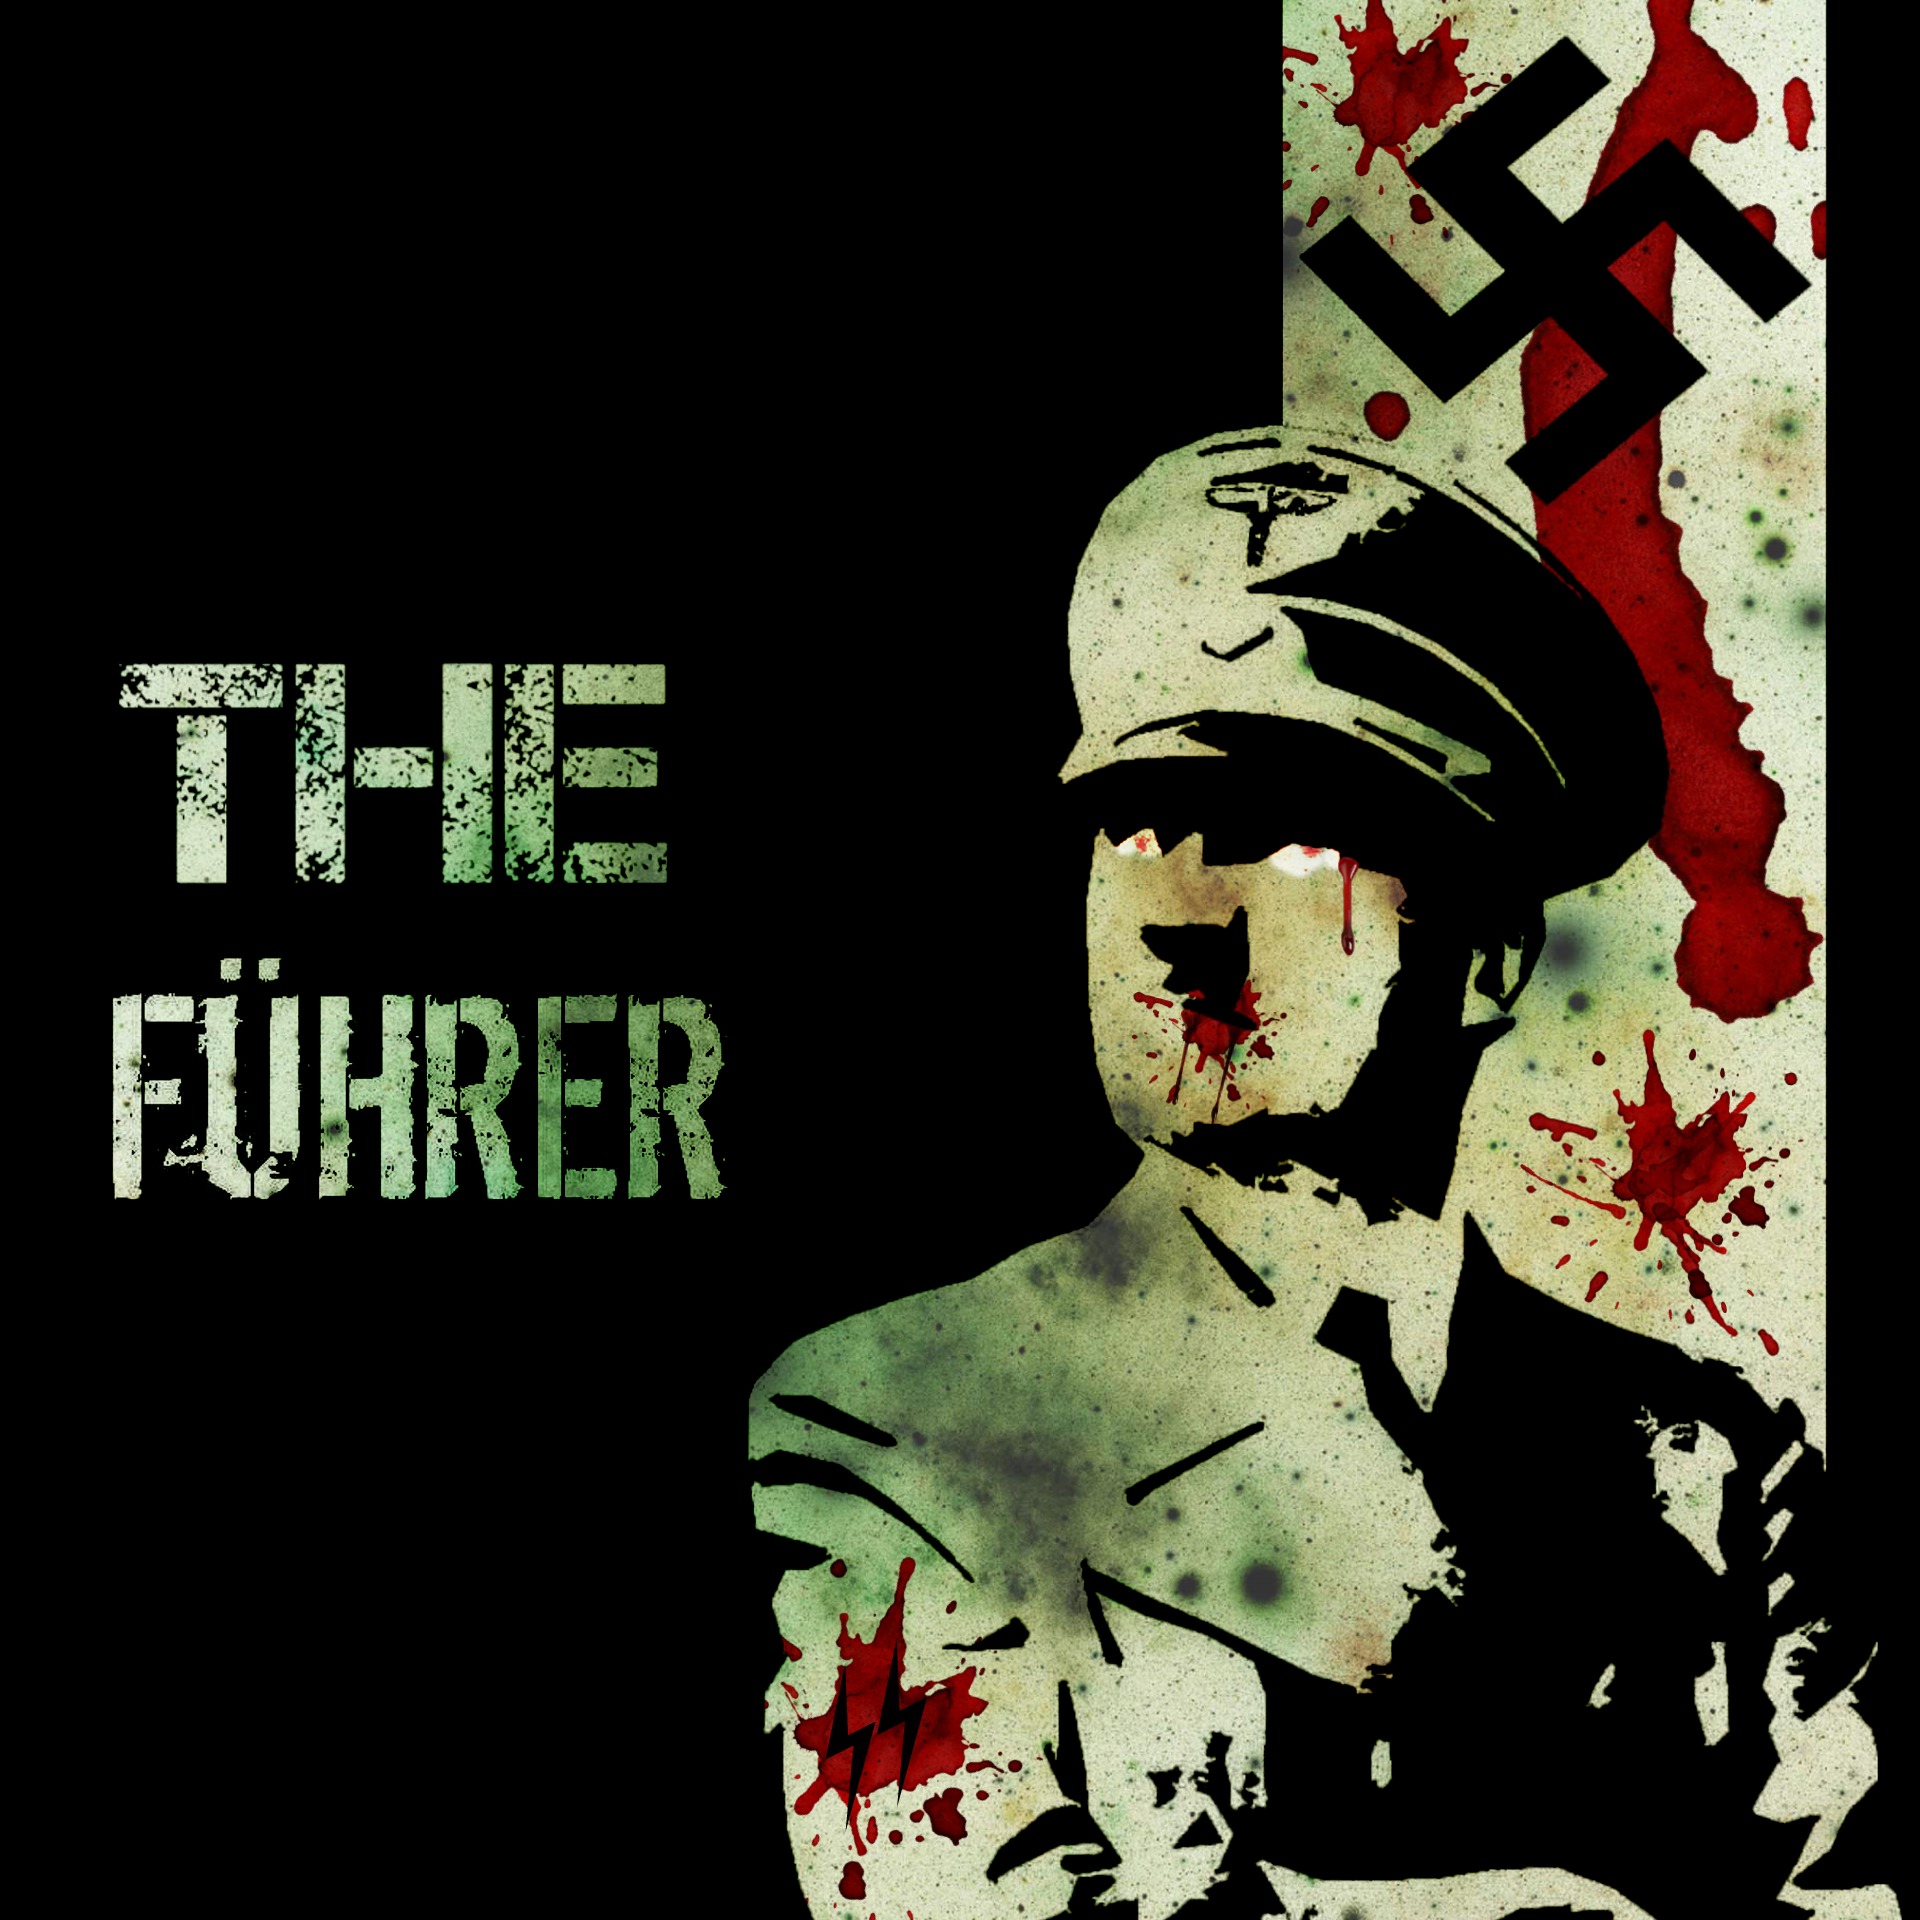 The Fuhrer will be one of Joe Wheeler's biggest ever projects to date. This will take 2 years to complete.